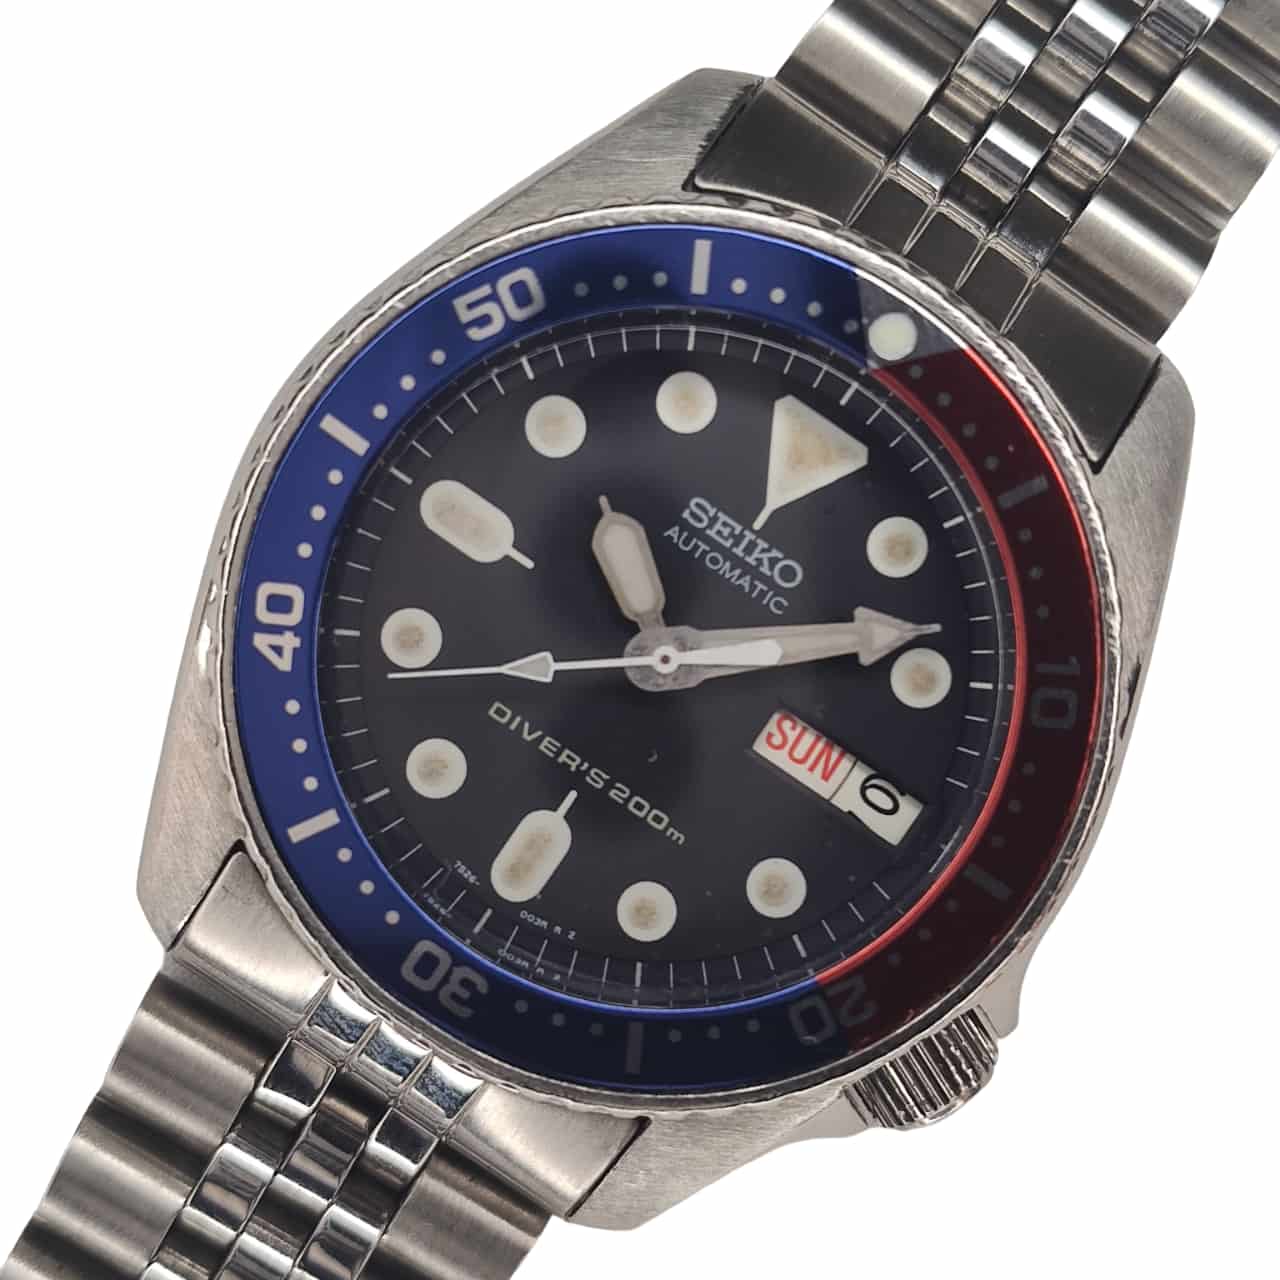 Seiko Pepsi 7S26-0030 Day & Date Automatic Diver 200m – Temple of Time